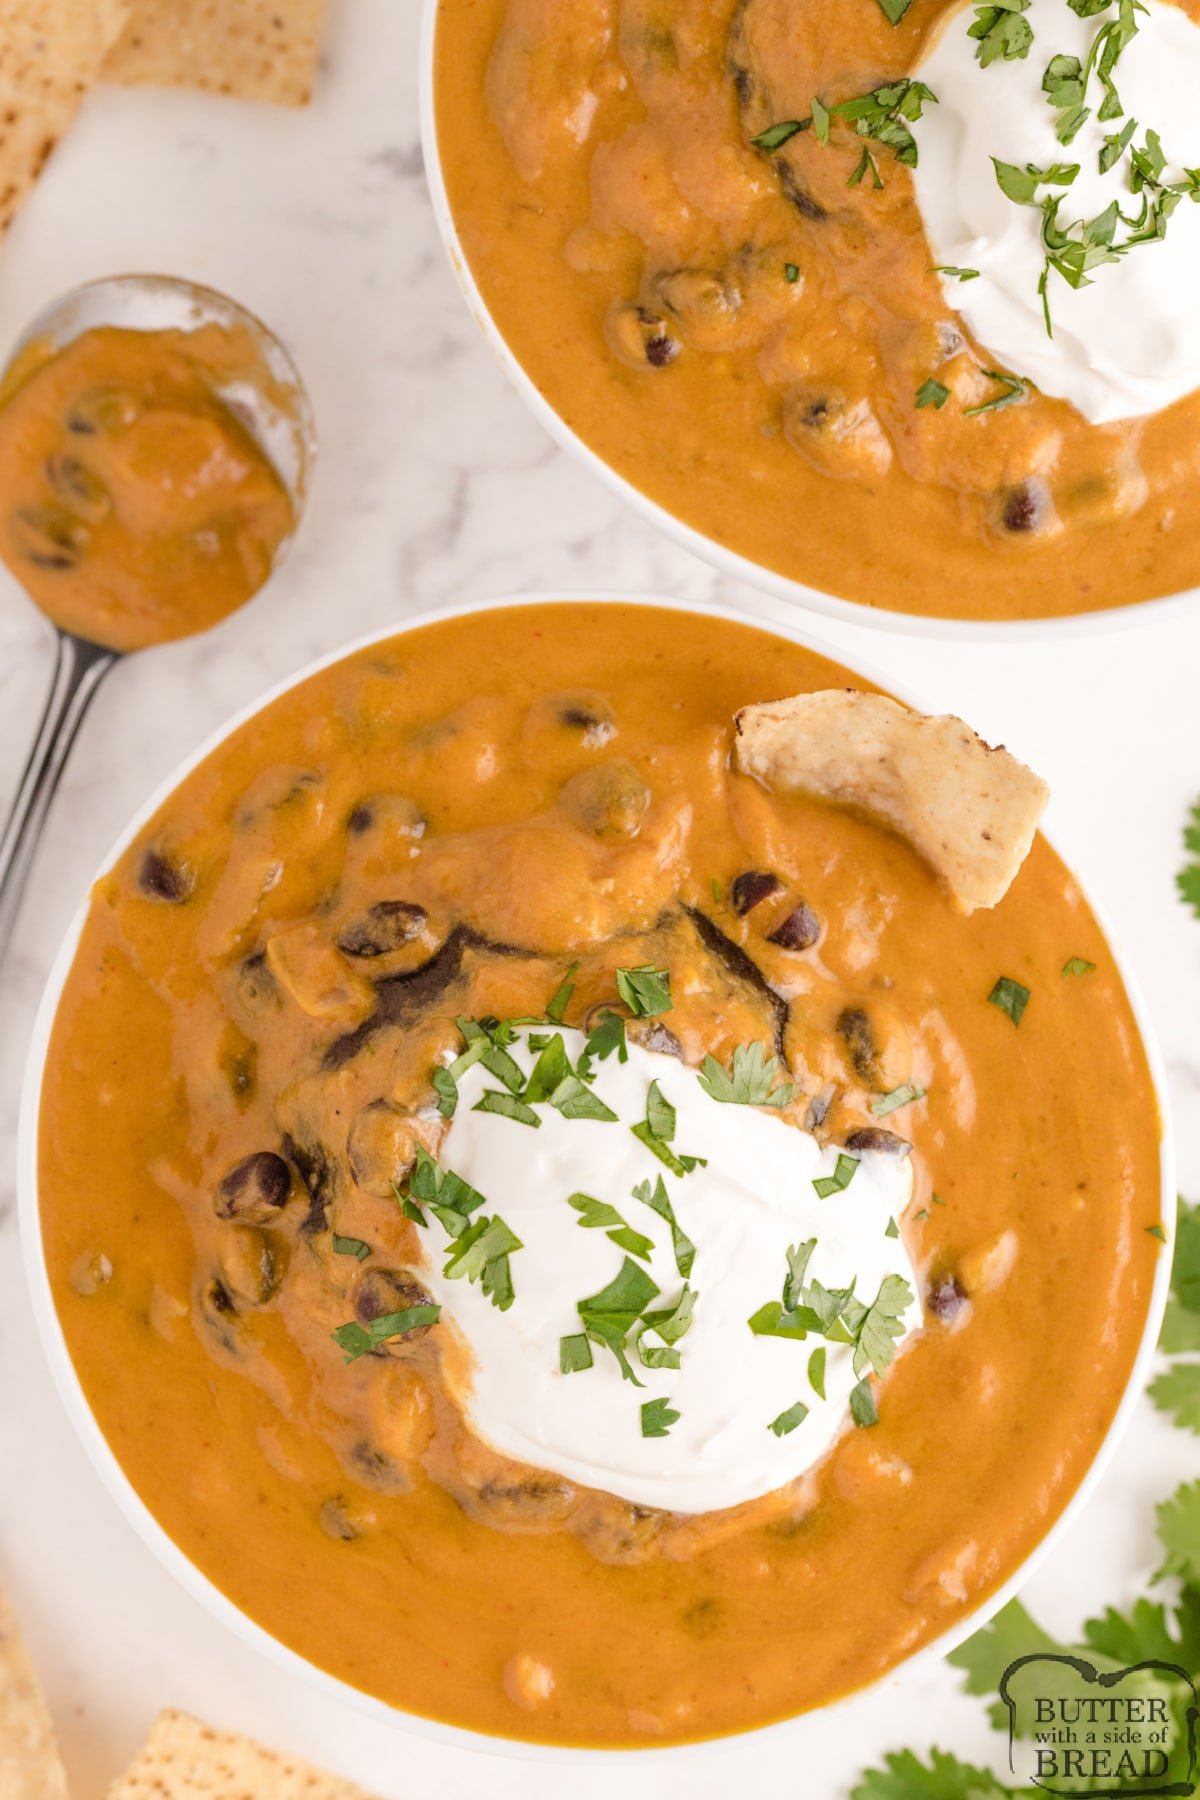 Easy Pumpkin Soup made in less than 20 minutes with a can of pumpkin, black beans and lots of flavor! Delicious homemade pumpkin soup recipe that is creamy, healthy and delicious!